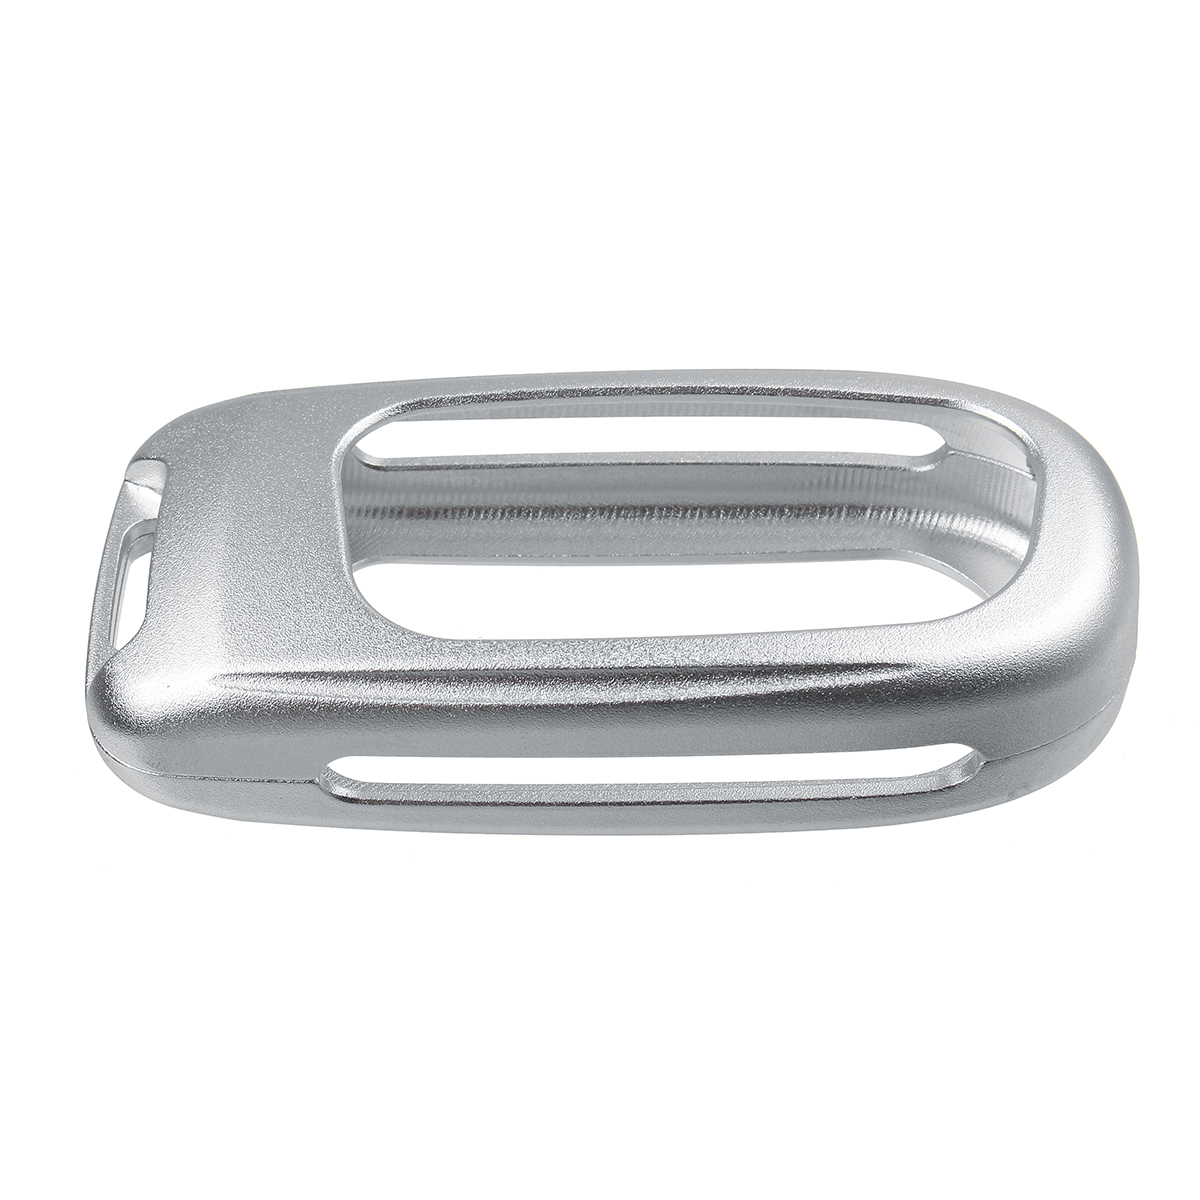 Aluminum-Alloy-Remote-Key-Cover-Fob-Case-Shell-For-Dodge-Jeep-Grand-Chrysler-1443088-10